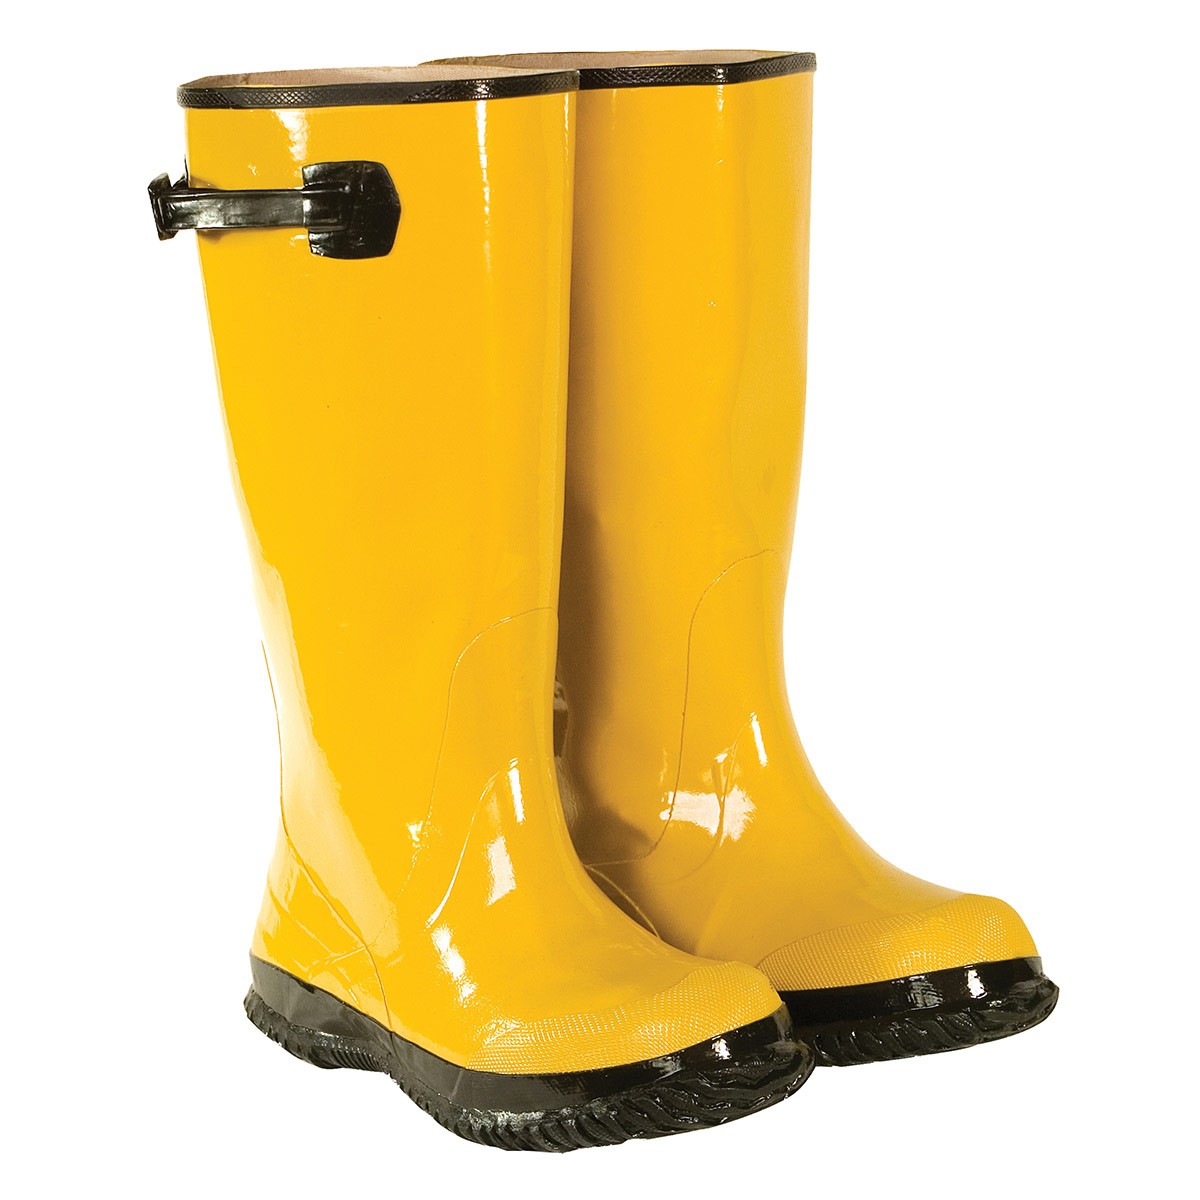 Rubber Boots Png Hd Hdpng.com 1200 - Rubber Boots, Transparent background PNG HD thumbnail